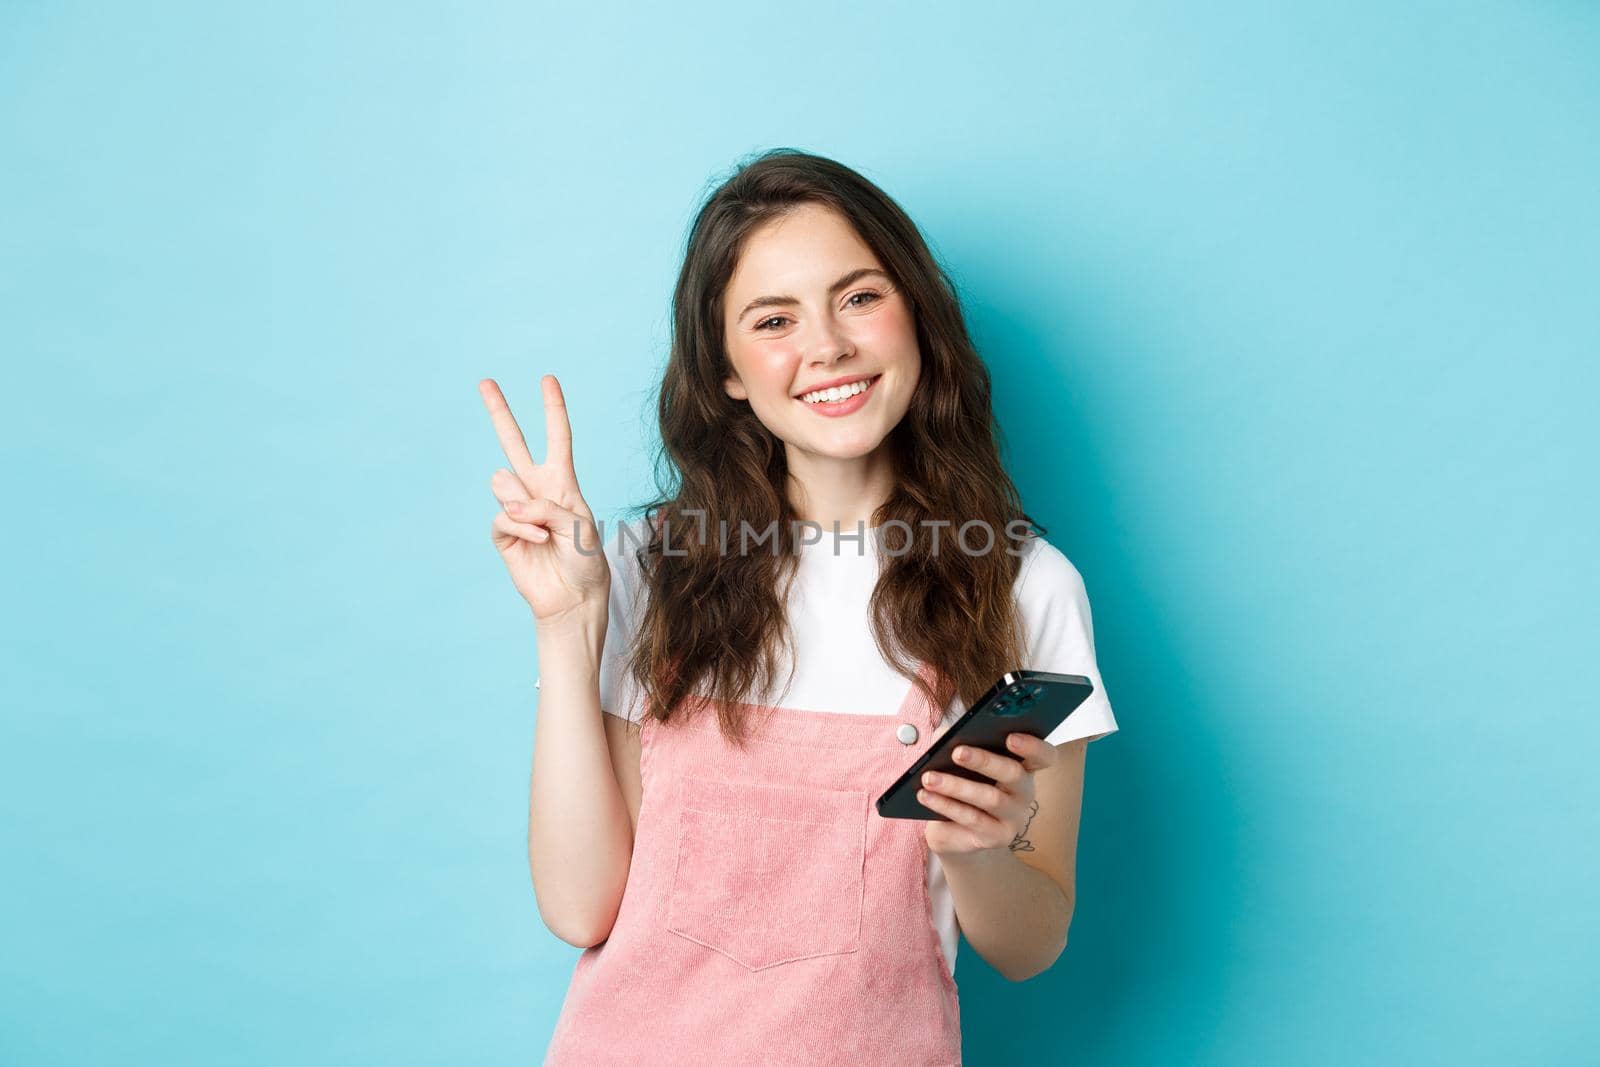 Online shopping. Cute and cheerful young woman smiling, holding smartphone and showing peace v-sign at camera, standing against blue background.